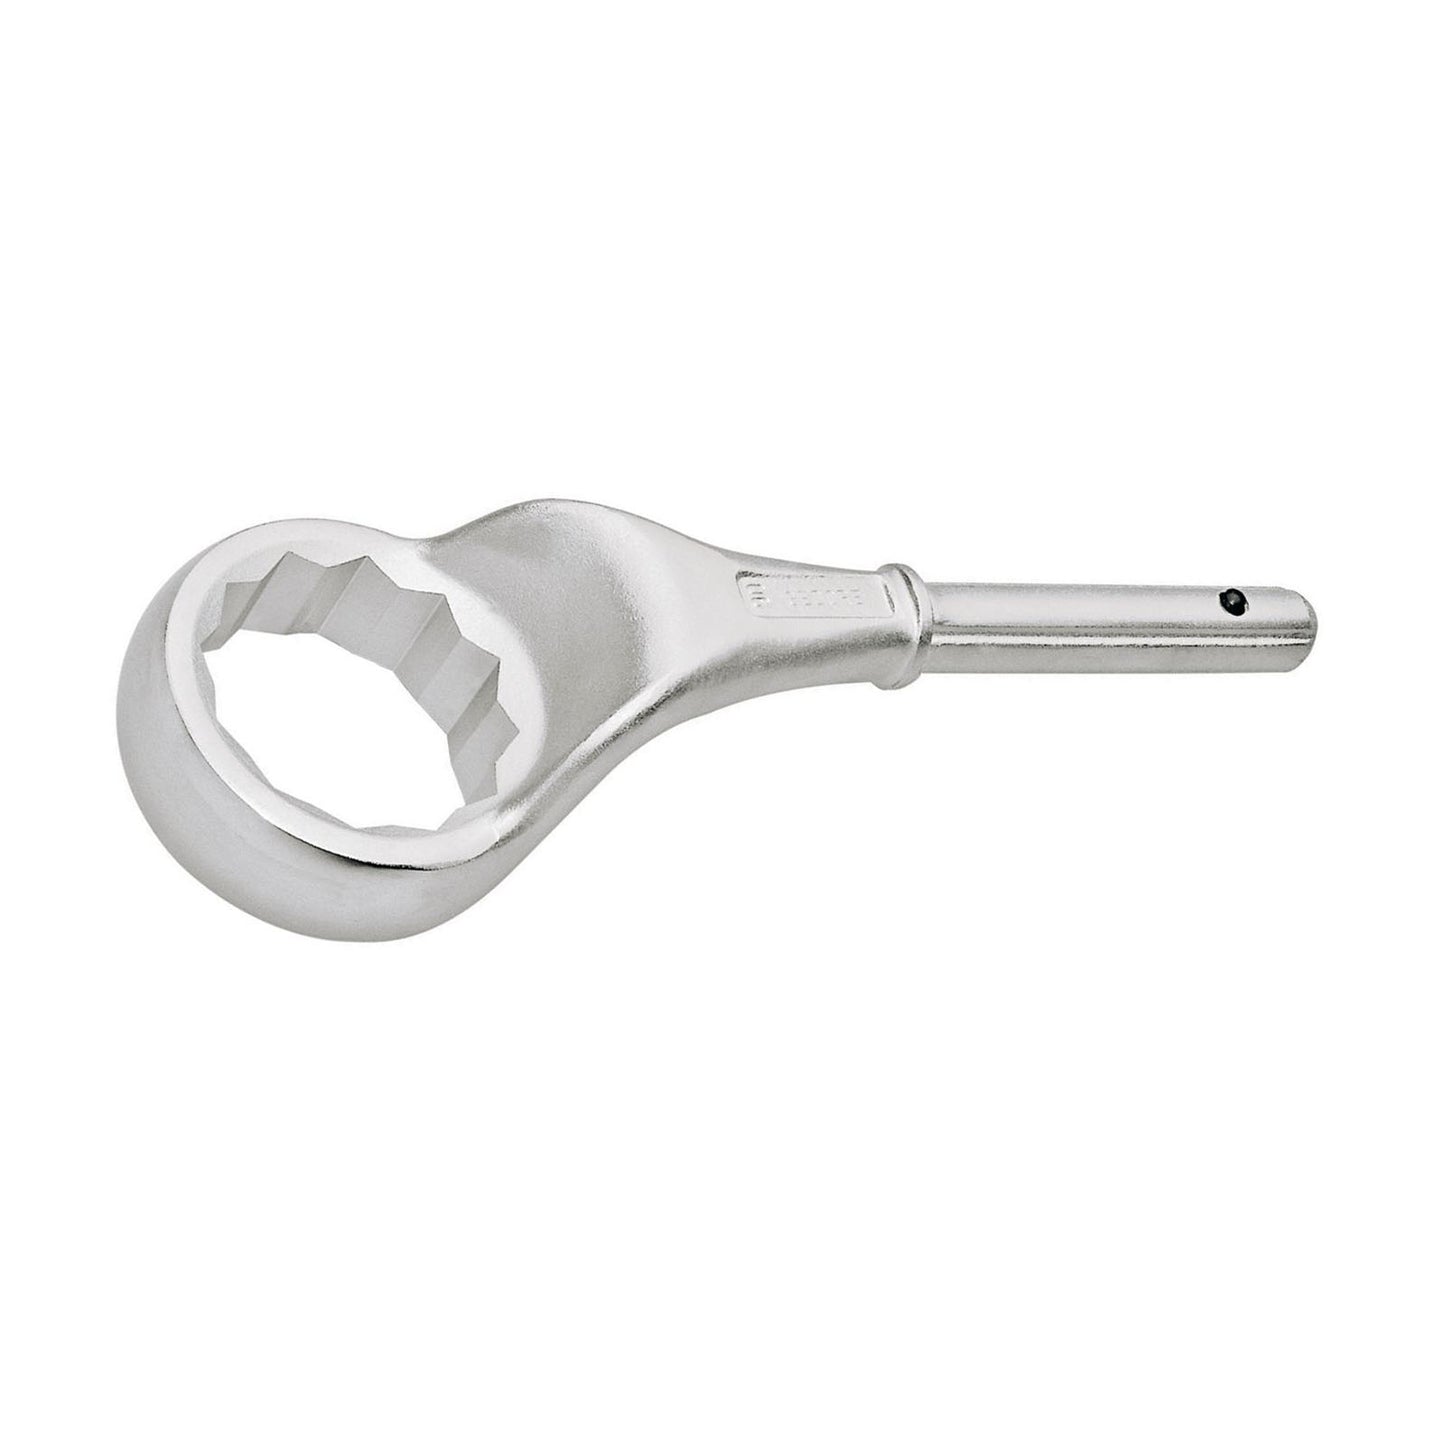 GEDORE 2 A 41 - Traction Wrench, 41mm (6034300)